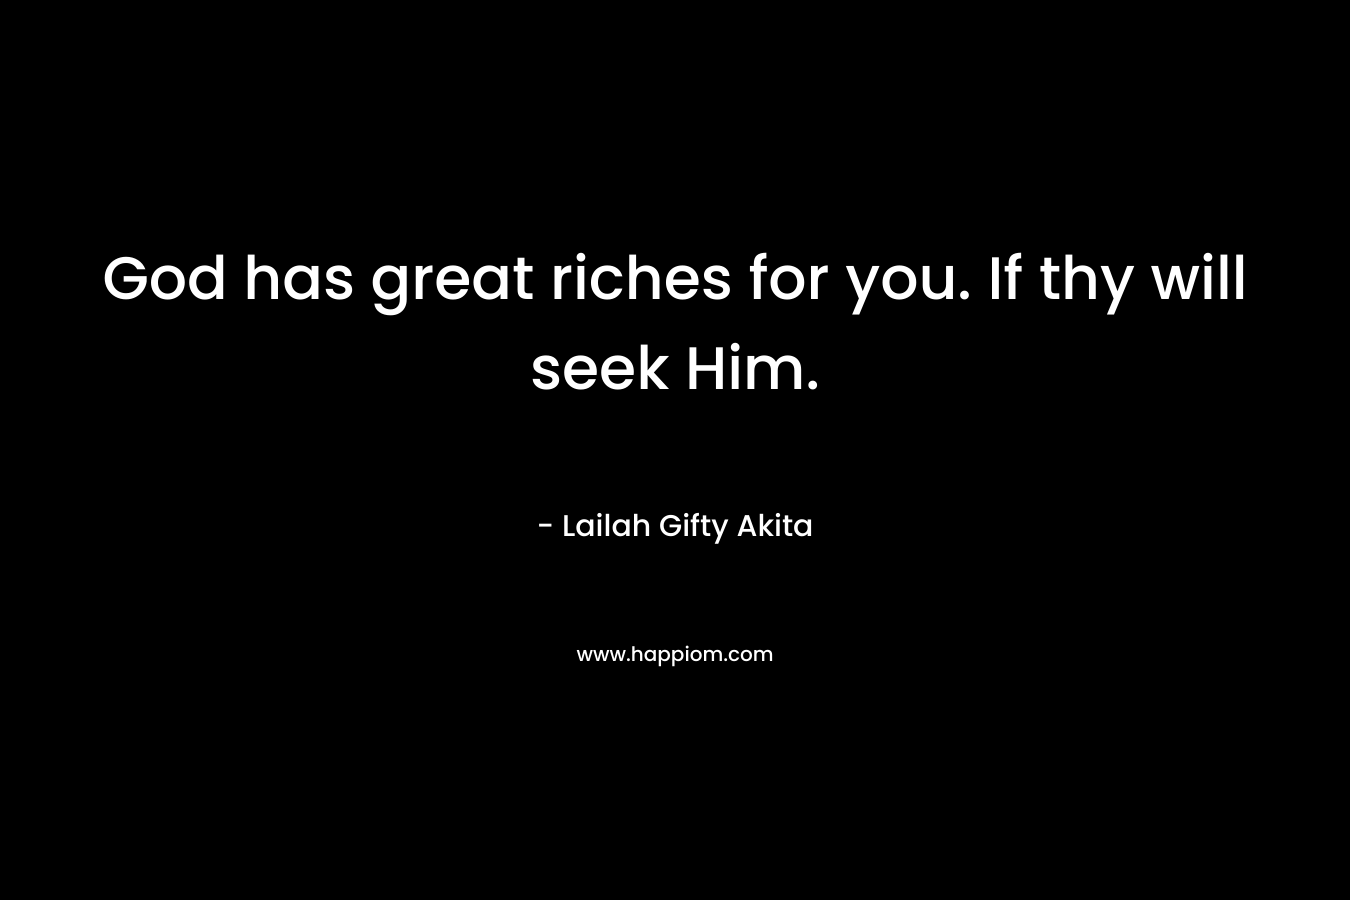 God has great riches for you. If thy will seek Him. – Lailah Gifty Akita